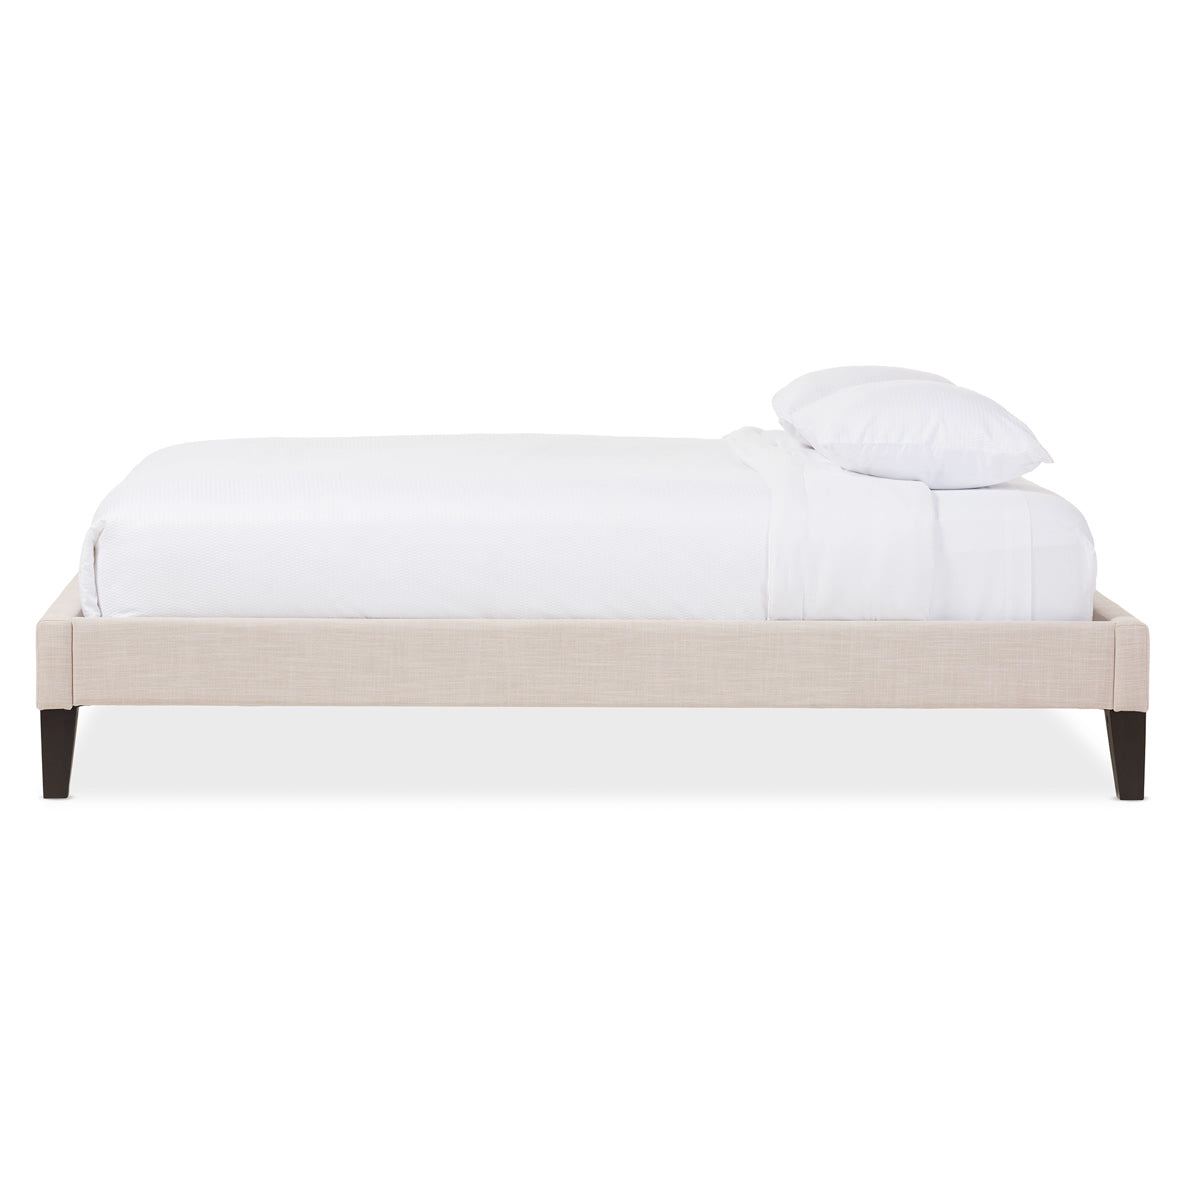 Baxton Studio Lancashire Modern and Contemporary Beige Linen Fabric Upholstered Queen Size Bed Frame with Tapered Legs  Baxton Studio-Queen Bed-Minimal And Modern - 3